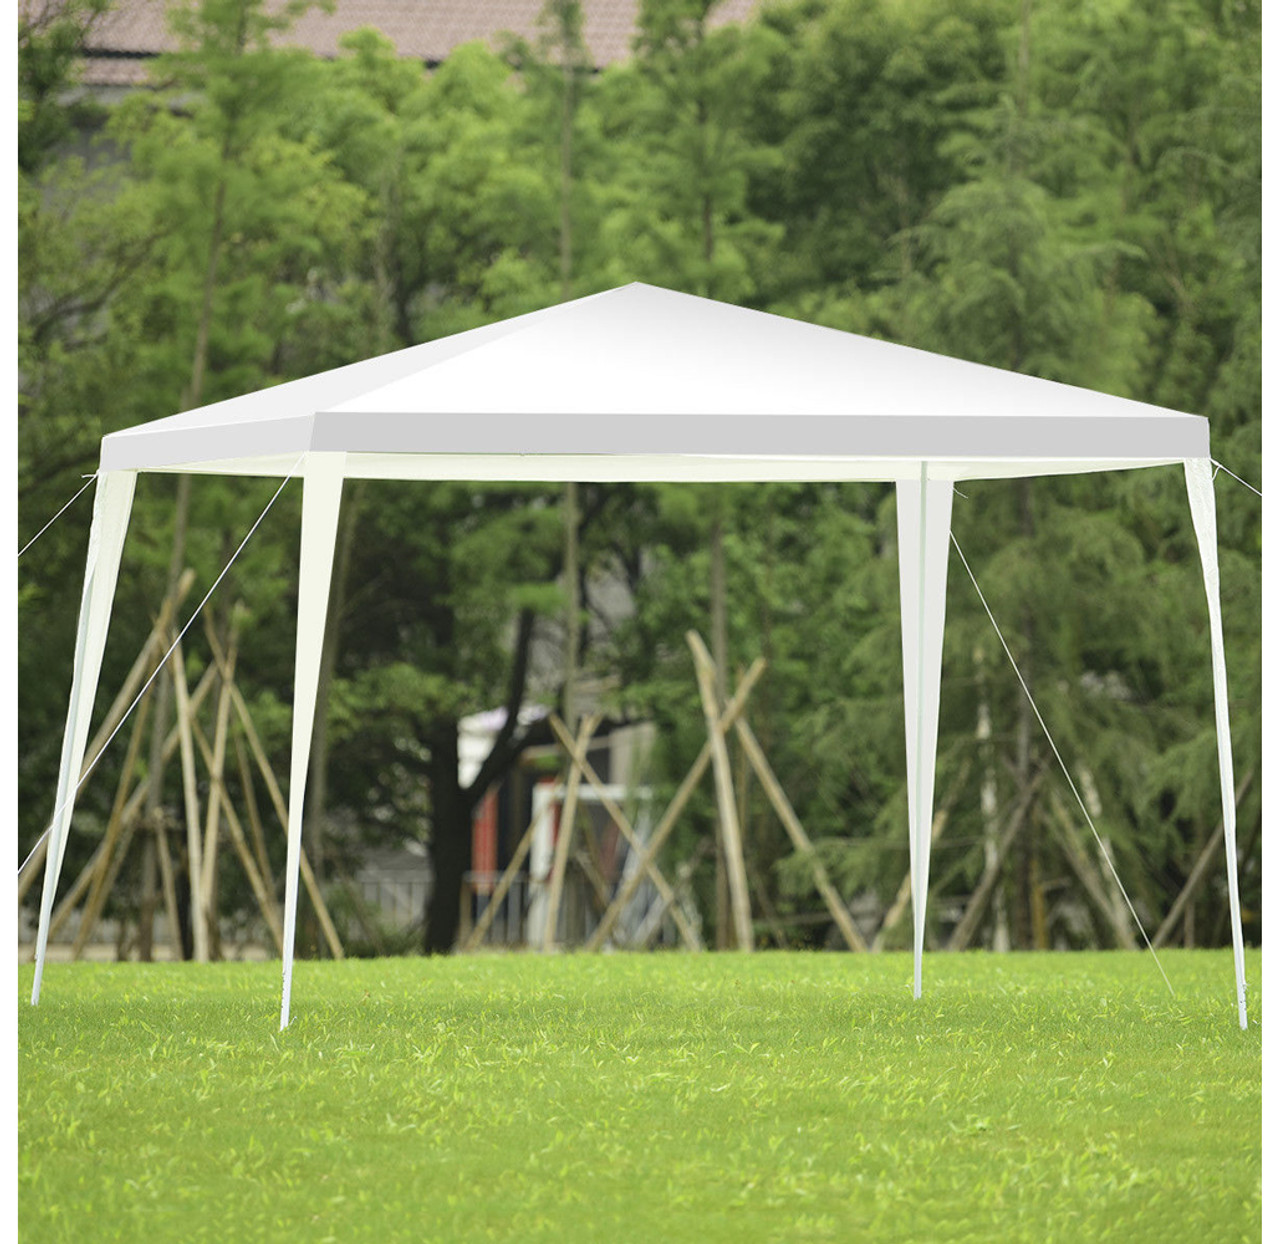 Waterproof 10' x 10' Outdoor Canopy product image